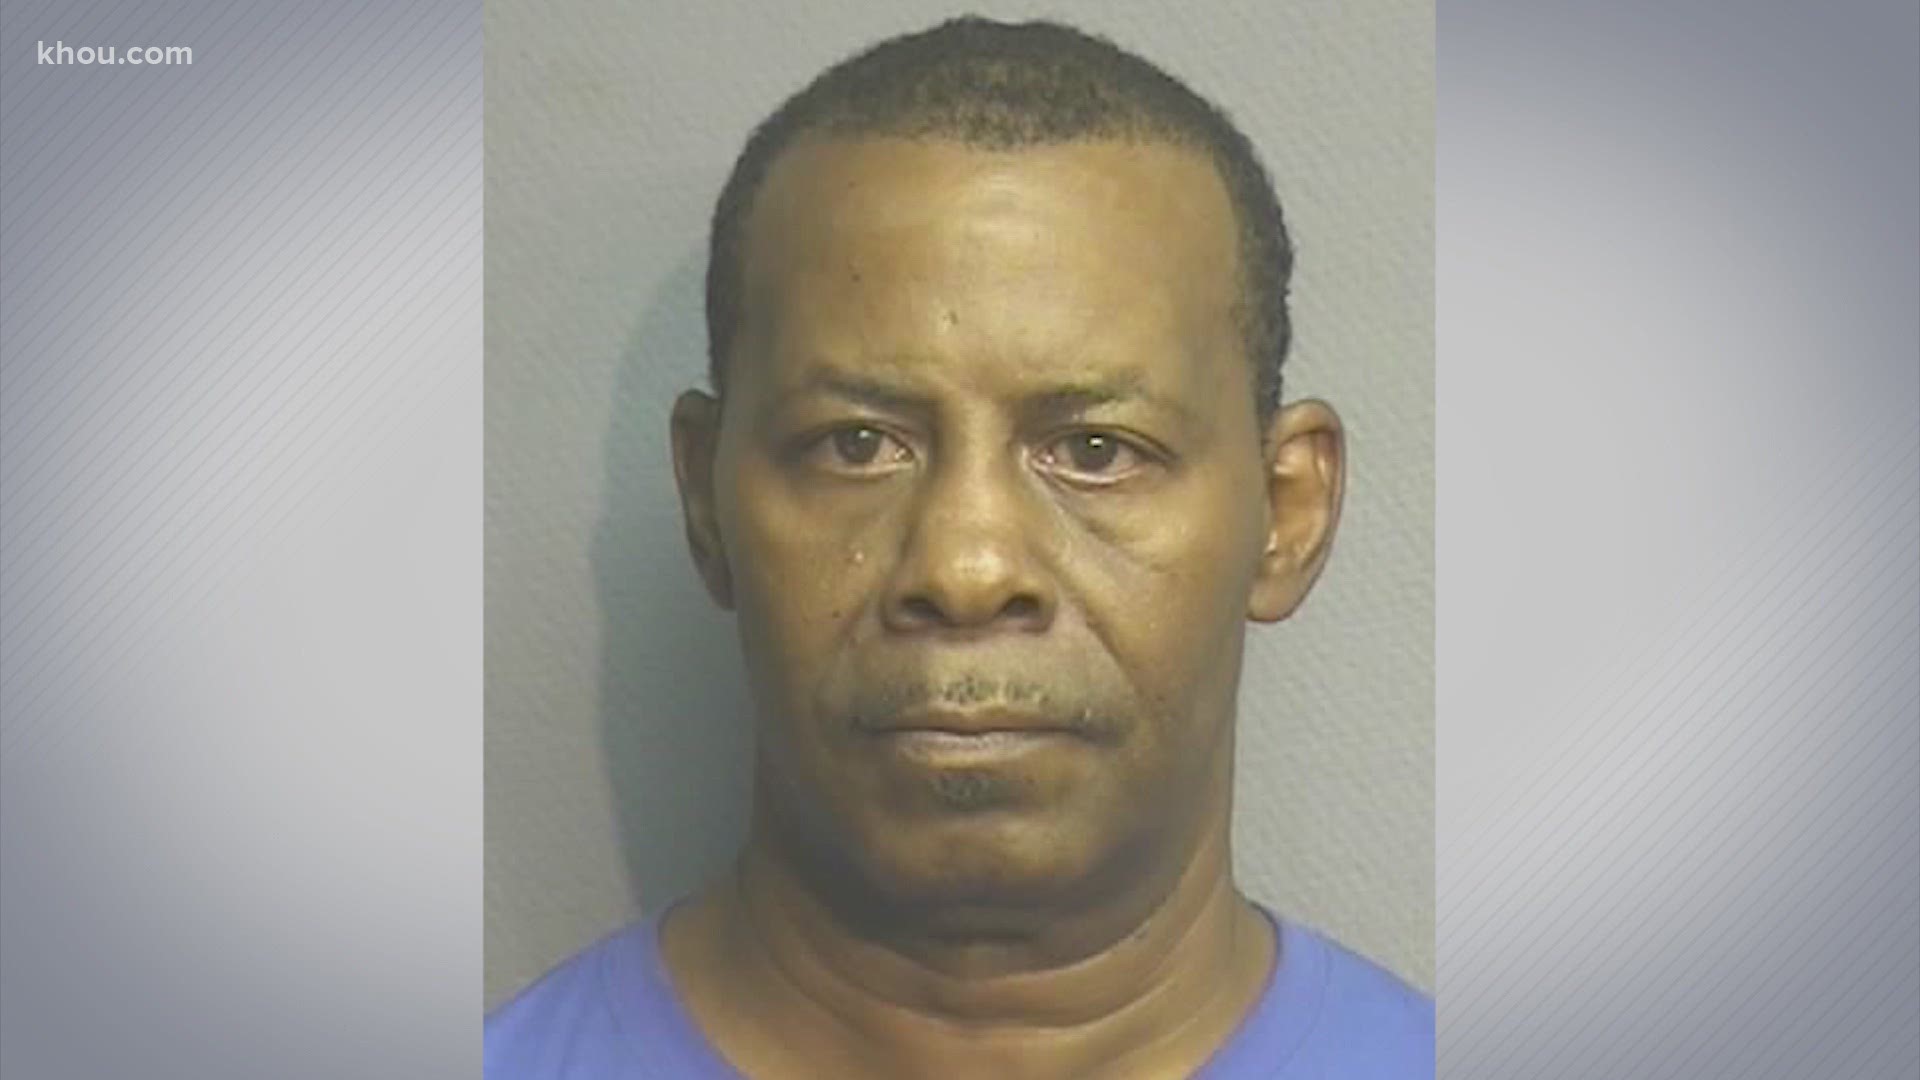 Houston police are looking for 56-year-old Lonnie Scott who is wanted for indecency with a child. The crime was reported in June 2018.